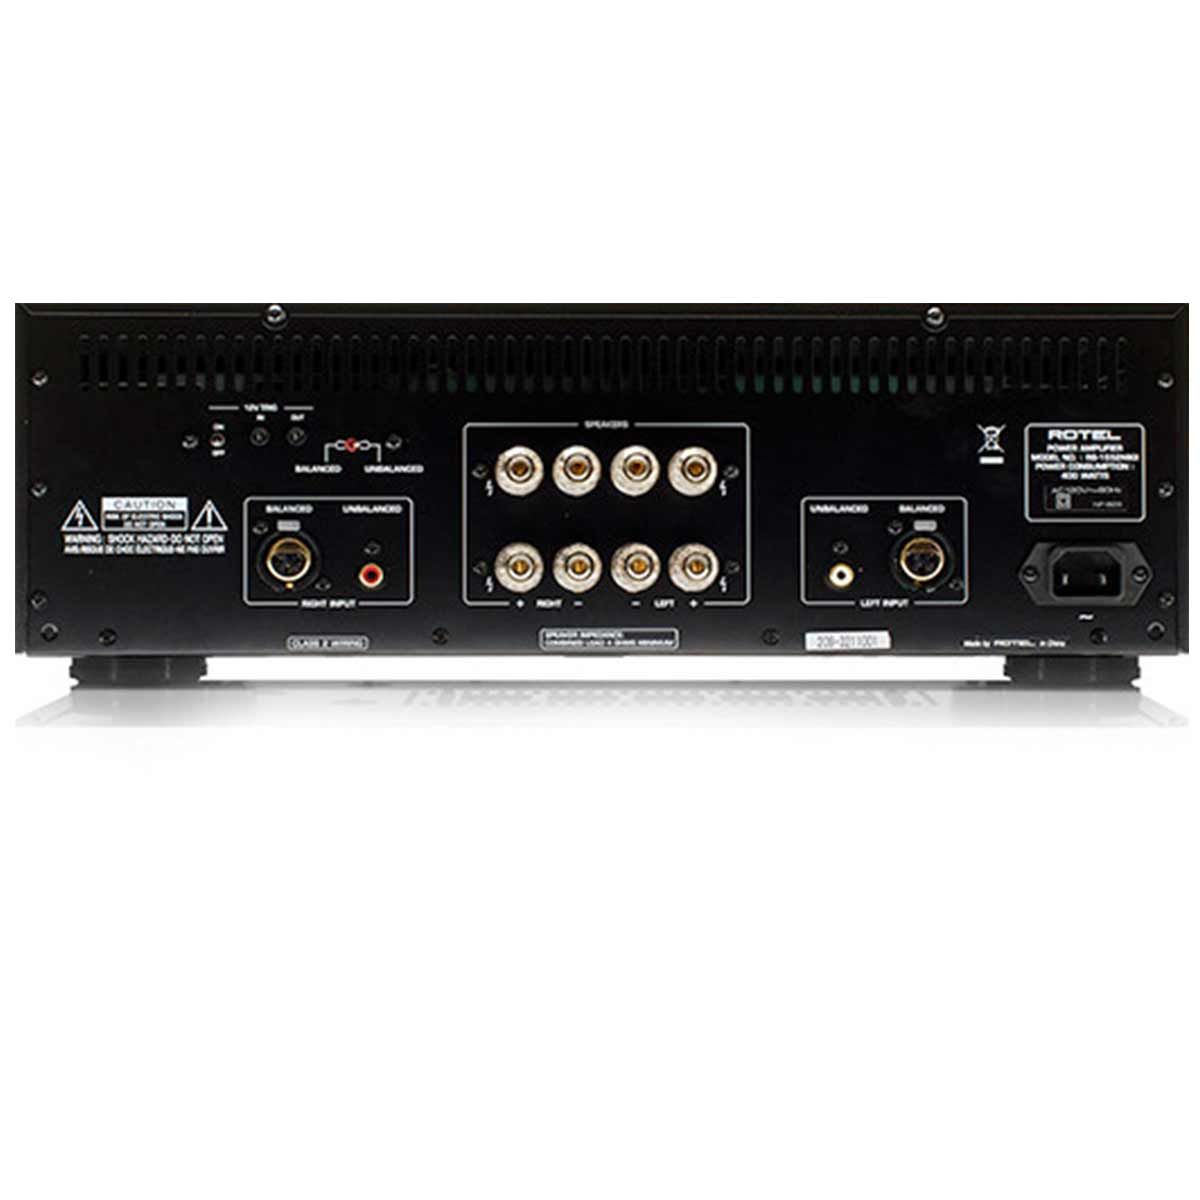 Rotel RB-1552 MKII Stereo Class A/B Power Amplifier